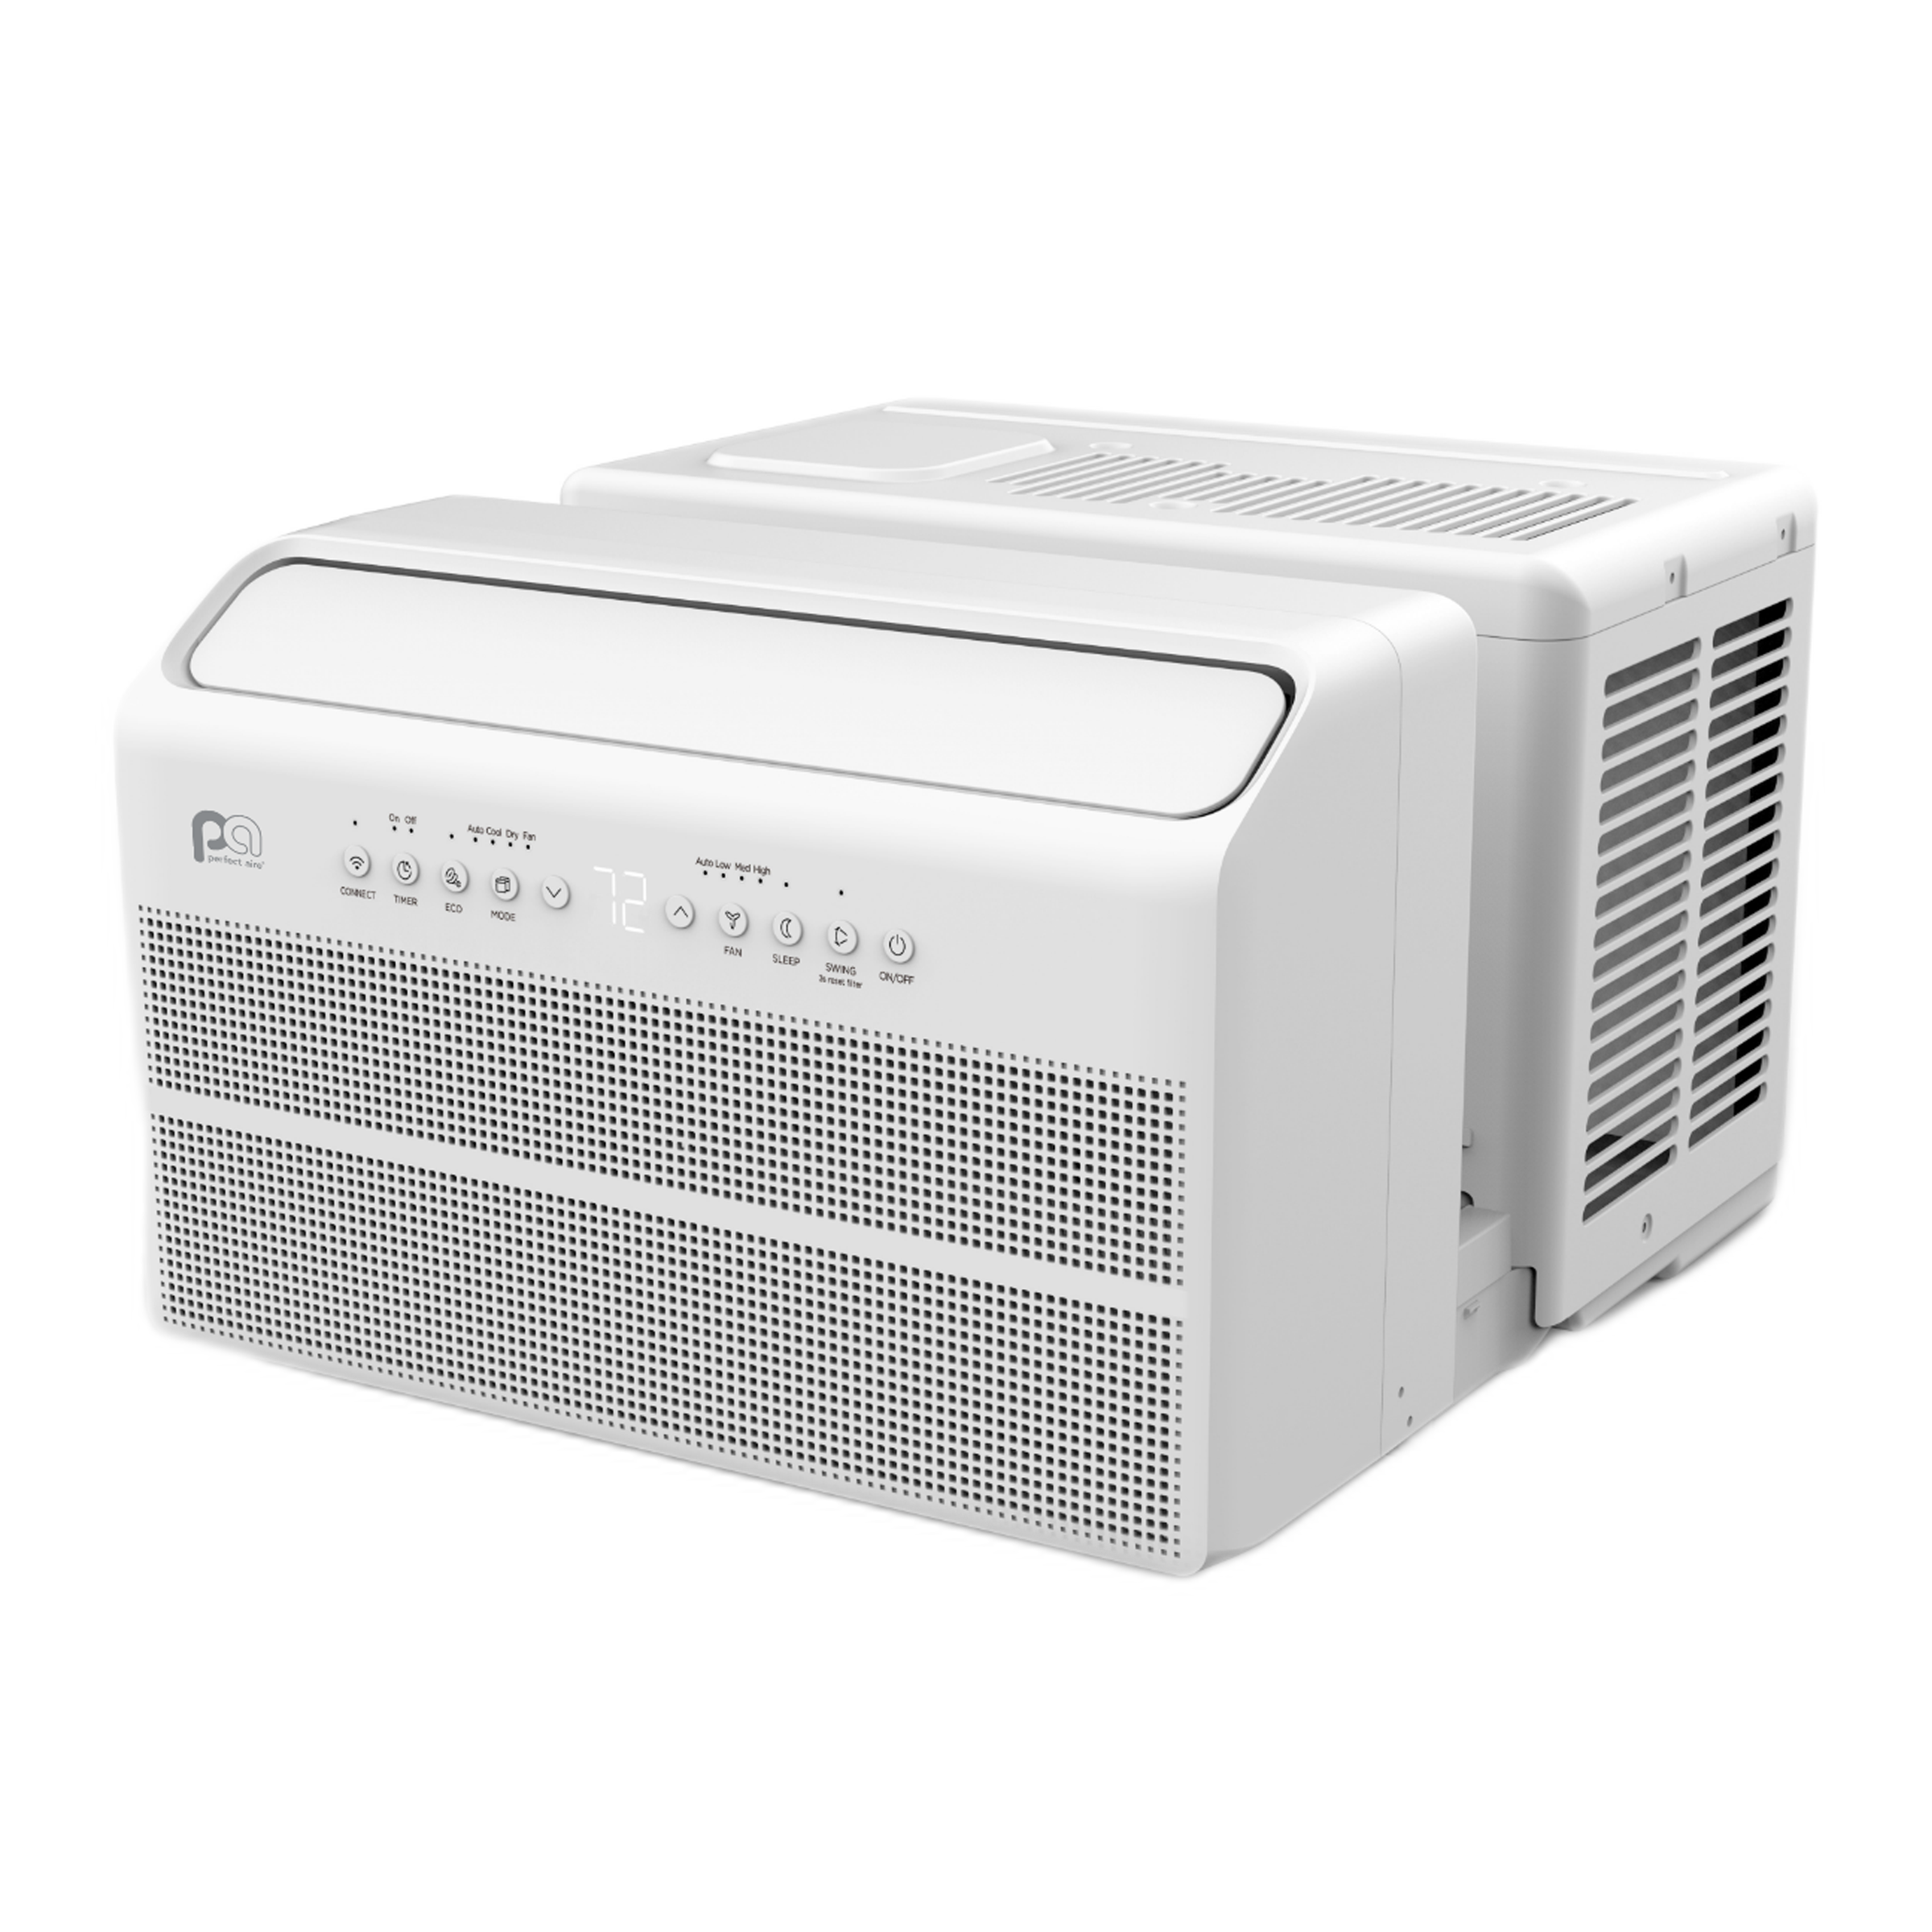 1PACU10000 Perfect Aire 10,000 BTU Energy Star U-Shaped Inverter Window Room Air Conditioner, Sq. ft: 450 Coverage with Wireless Smart Controls & Remote Control, R32 Refrigerant, 115V